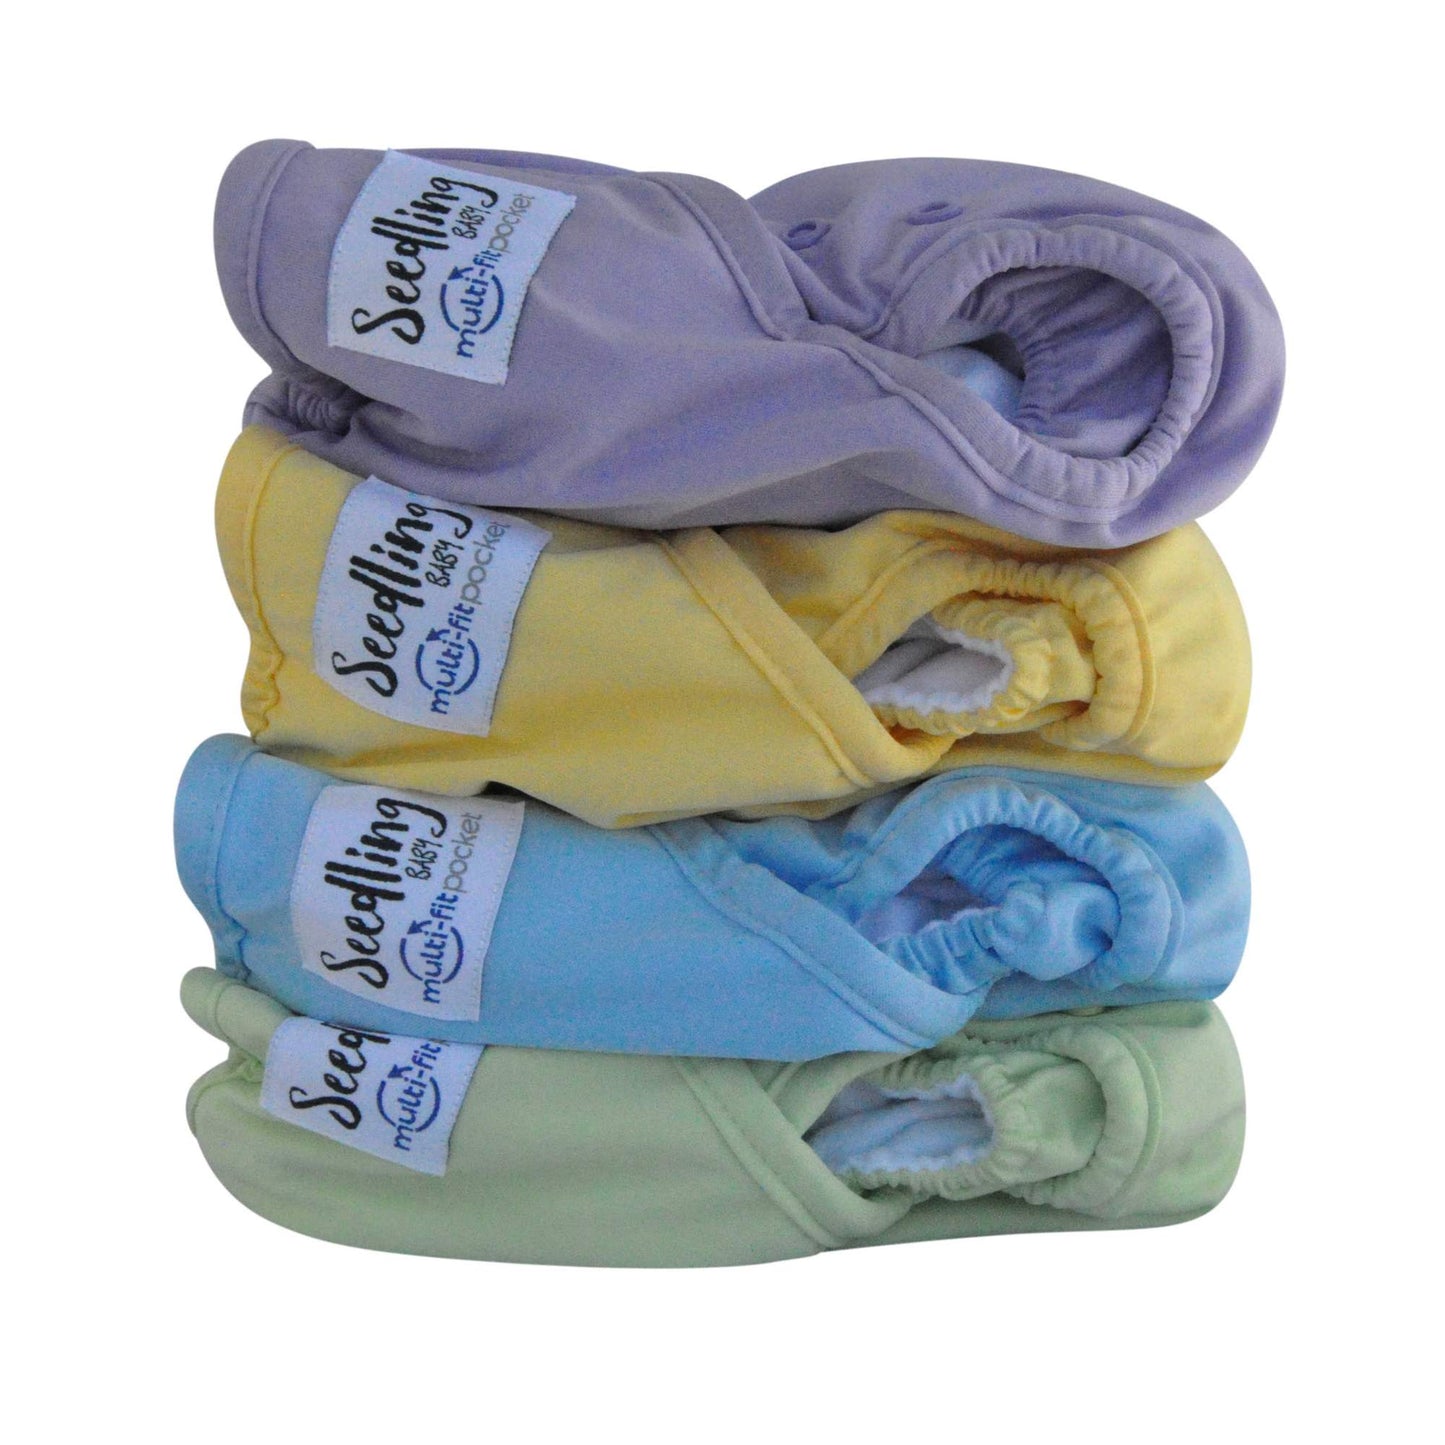 seedling baby multifit pocket nappy pastel stack reusable nappies